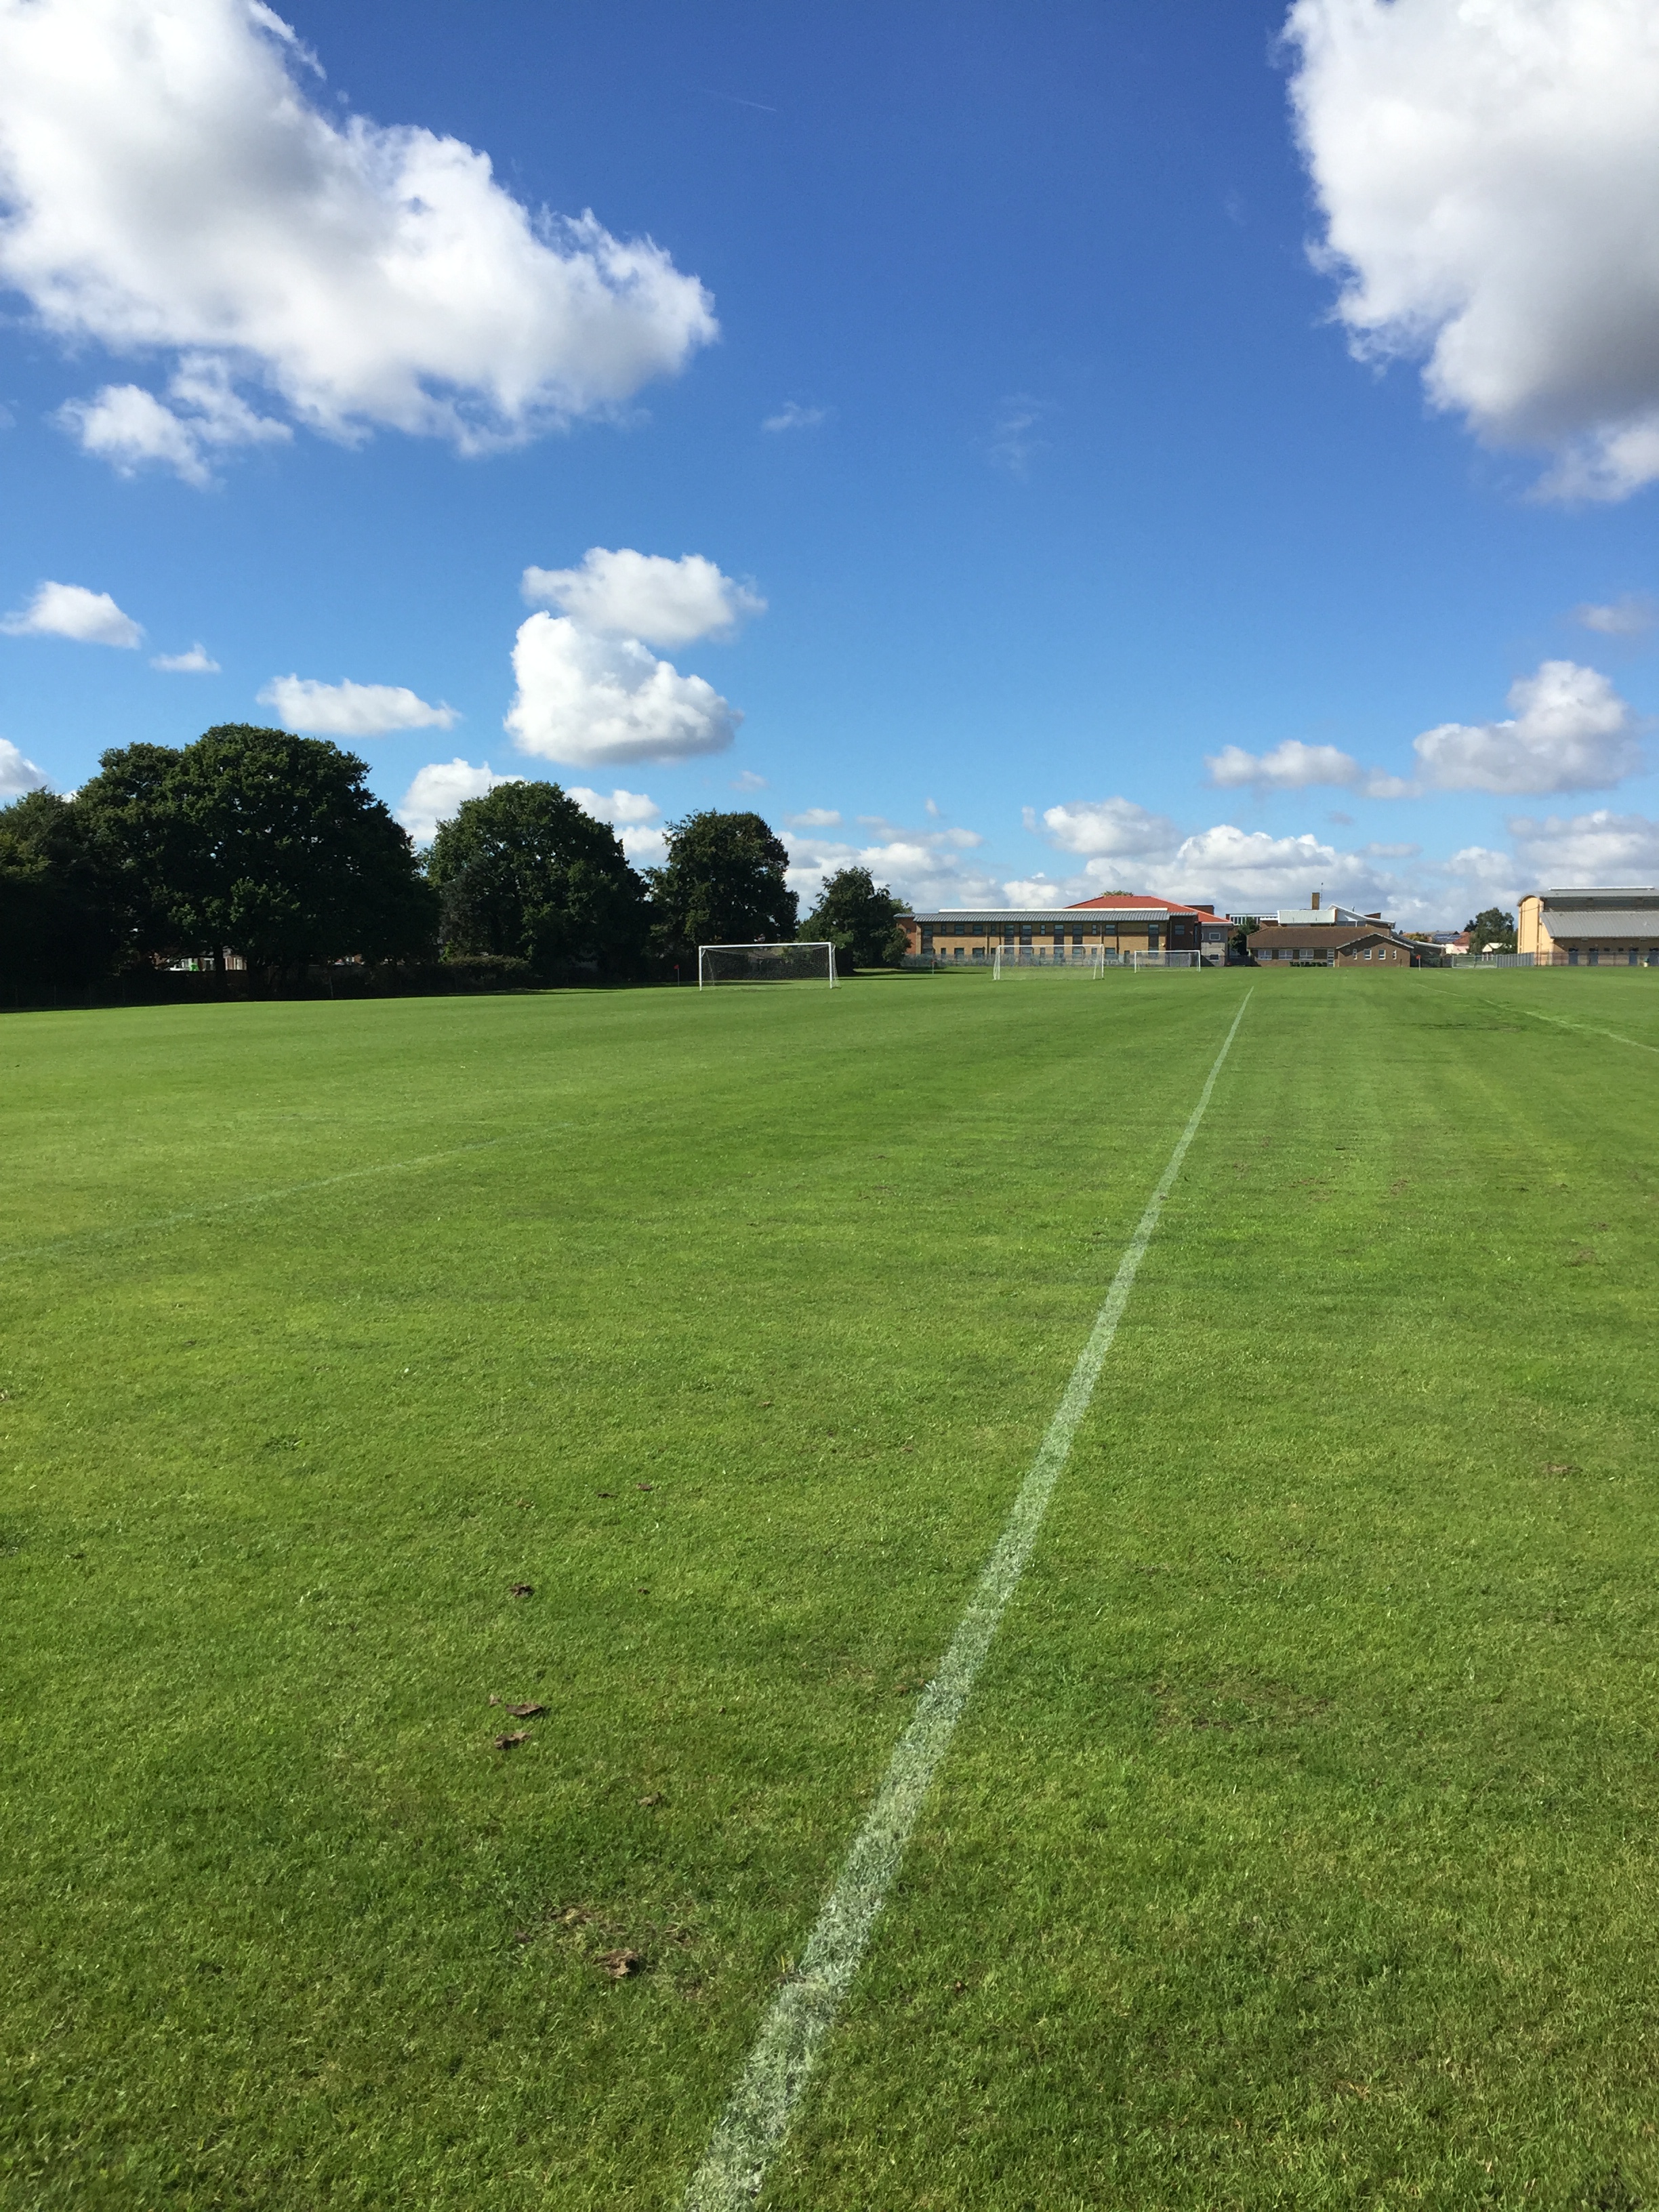 Image of the grass football pitch